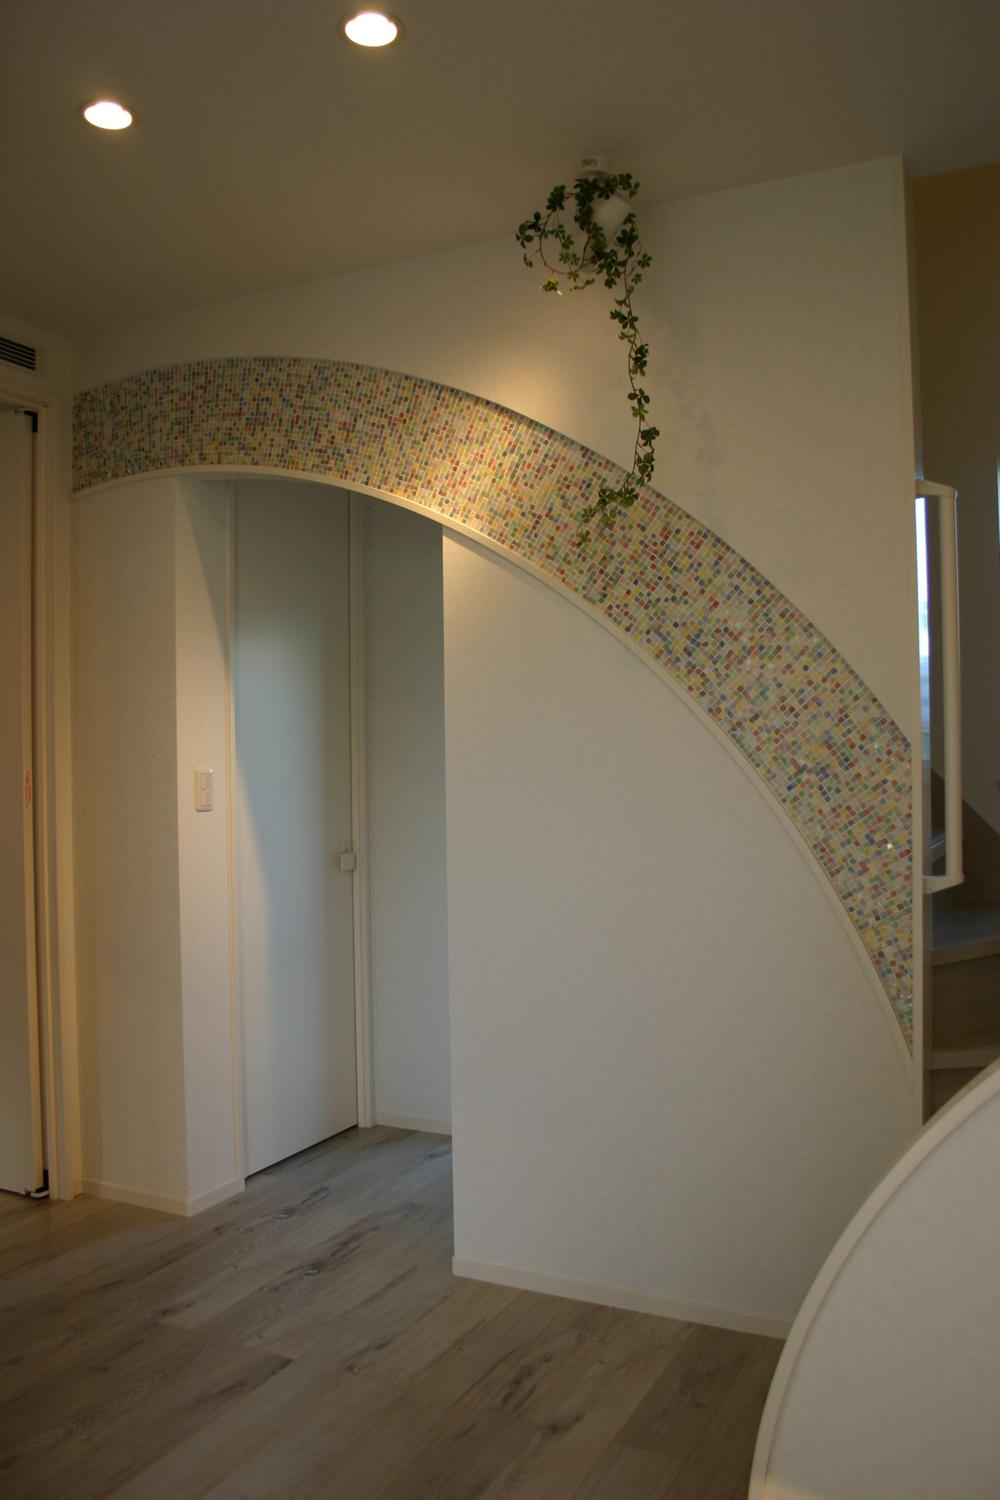 Non-living room. The entrance, Tiled was a rainbow motif will welcome you.